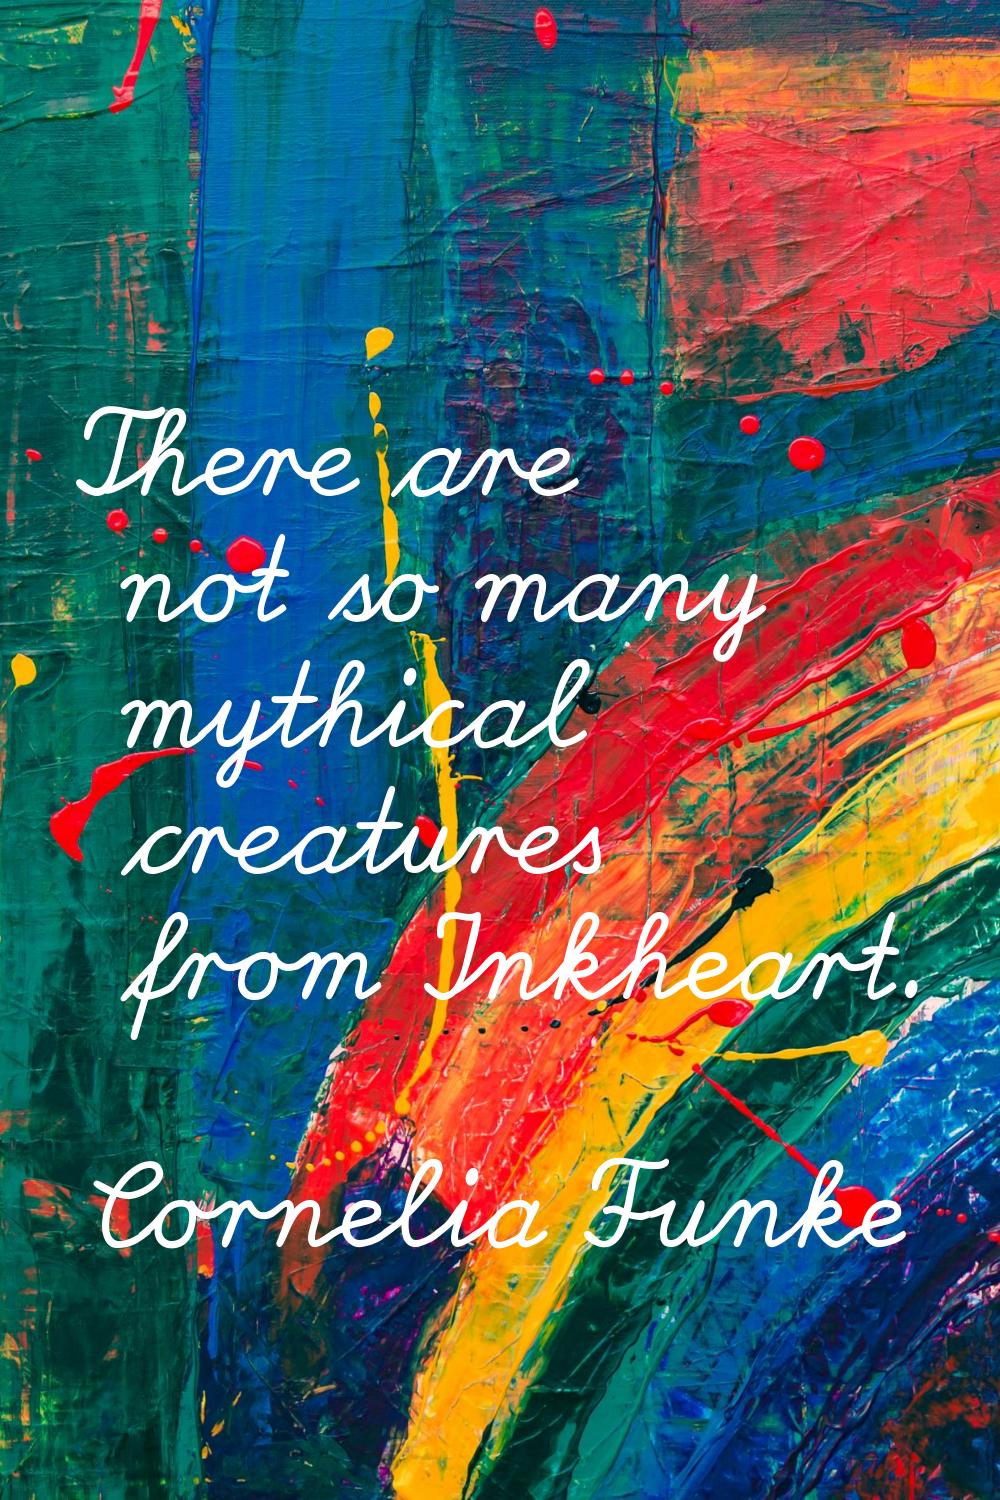 There are not so many mythical creatures from Inkheart.